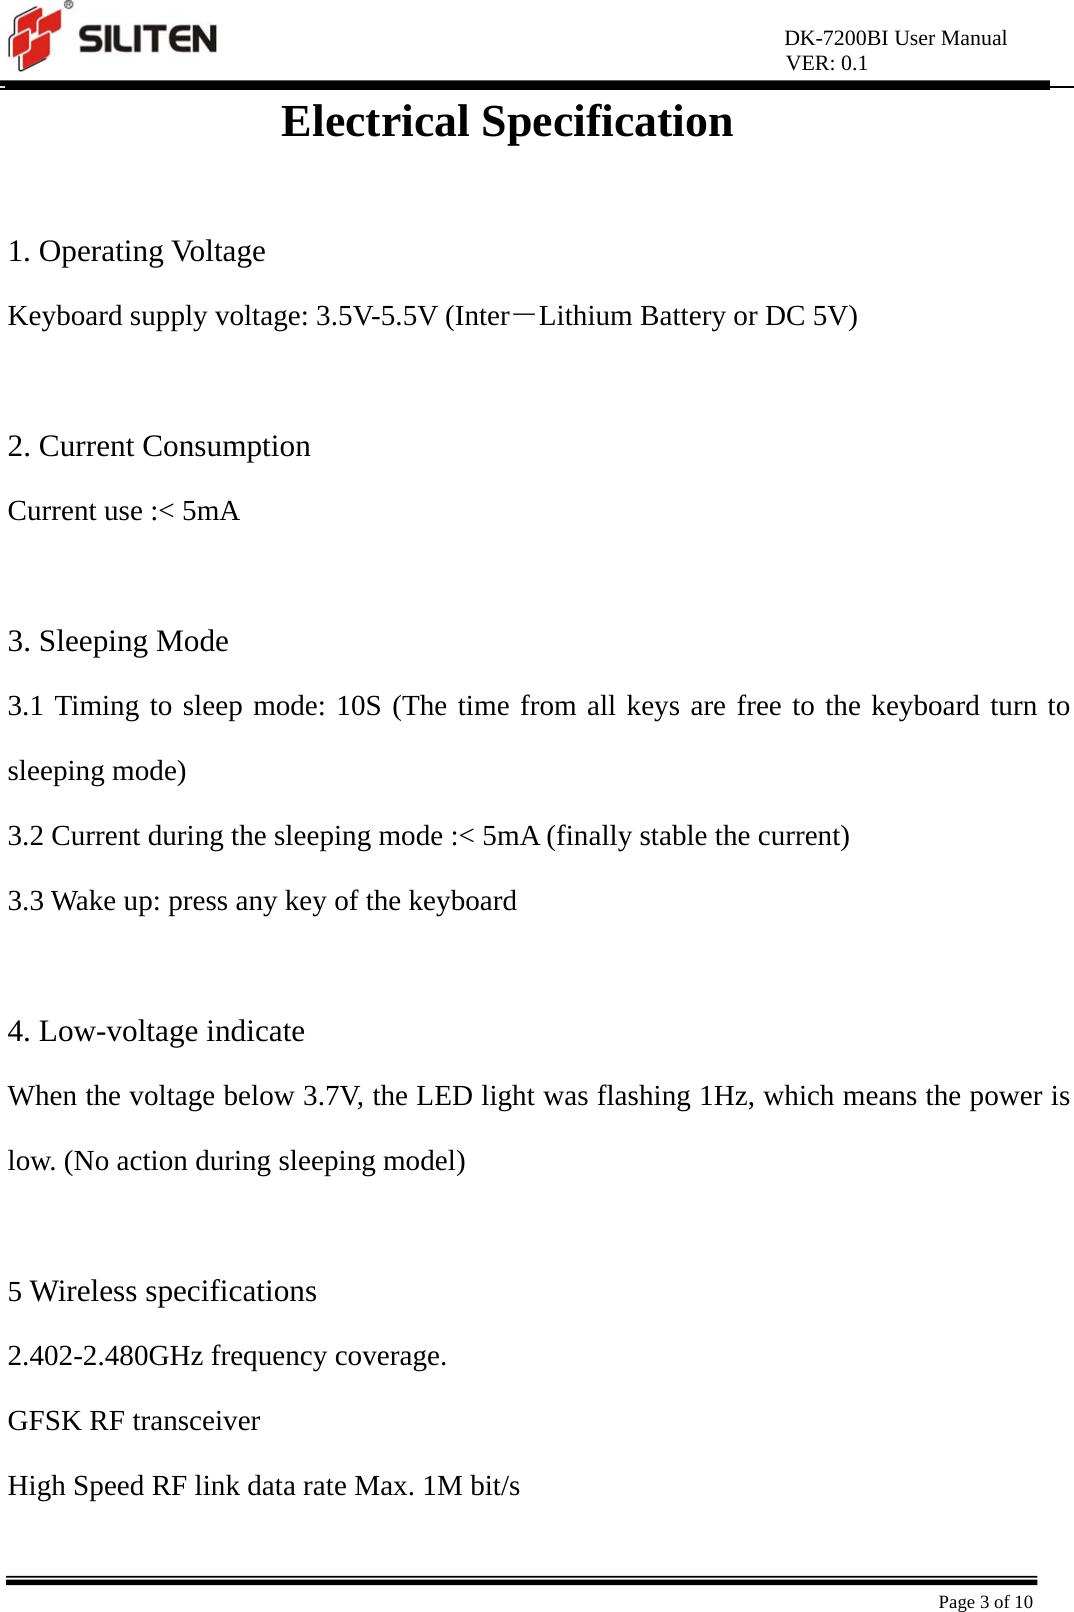 DK-7200BI User Manual VER: 0.1  Page 3 of 10 Electrical Specification  1. Operating Voltage Keyboard supply voltage: 3.5V-5.5V (Inter－Lithium Battery or DC 5V)  2. Current Consumption Current use :&lt; 5mA  3. Sleeping Mode 3.1 Timing to sleep mode: 10S (The time from all keys are free to the keyboard turn to sleeping mode) 3.2 Current during the sleeping mode :&lt; 5mA (finally stable the current) 3.3 Wake up: press any key of the keyboard  4. Low-voltage indicate When the voltage below 3.7V, the LED light was flashing 1Hz, which means the power is low. (No action during sleeping model)  5 Wireless specifications 2.402-2.480GHz frequency coverage. GFSK RF transceiver High Speed RF link data rate Max. 1M bit/s 